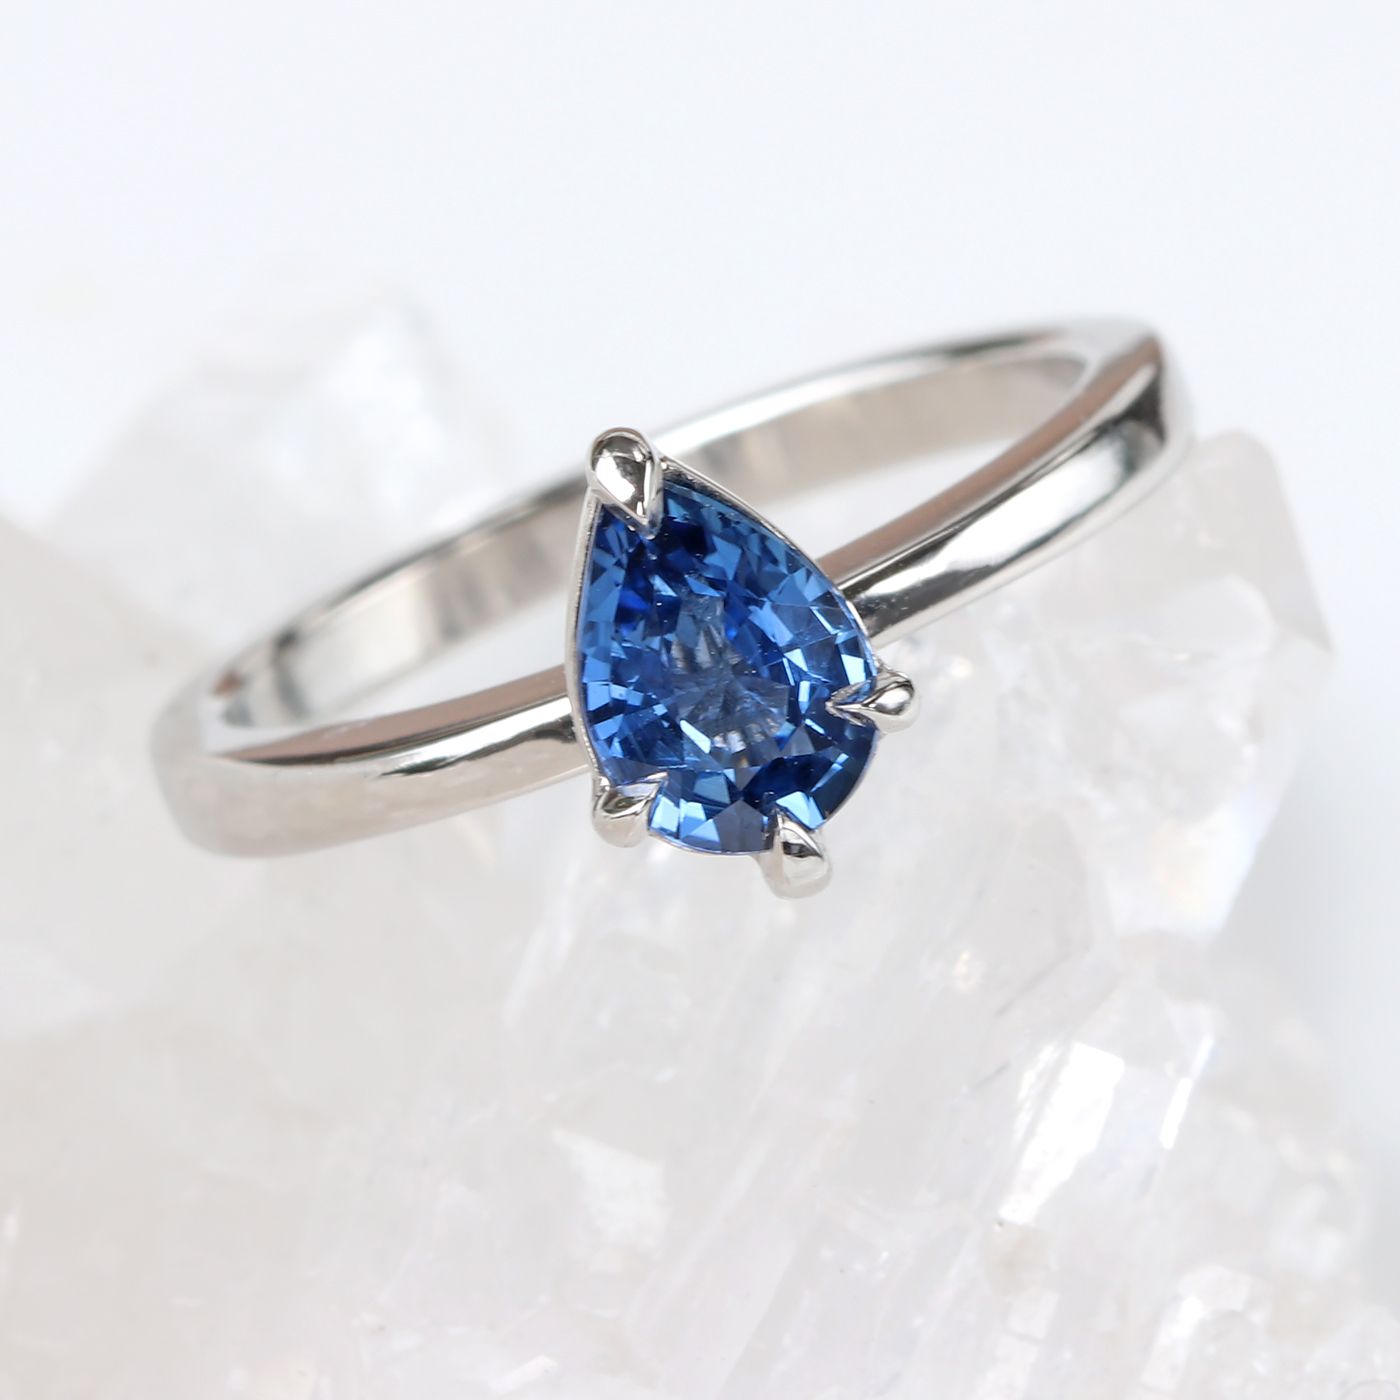 Lilia Nash Pear Cut Sapphire Platinum Ring – Size L Pertaining To Pear Shape Sapphire Halo Rings (View 13 of 25)